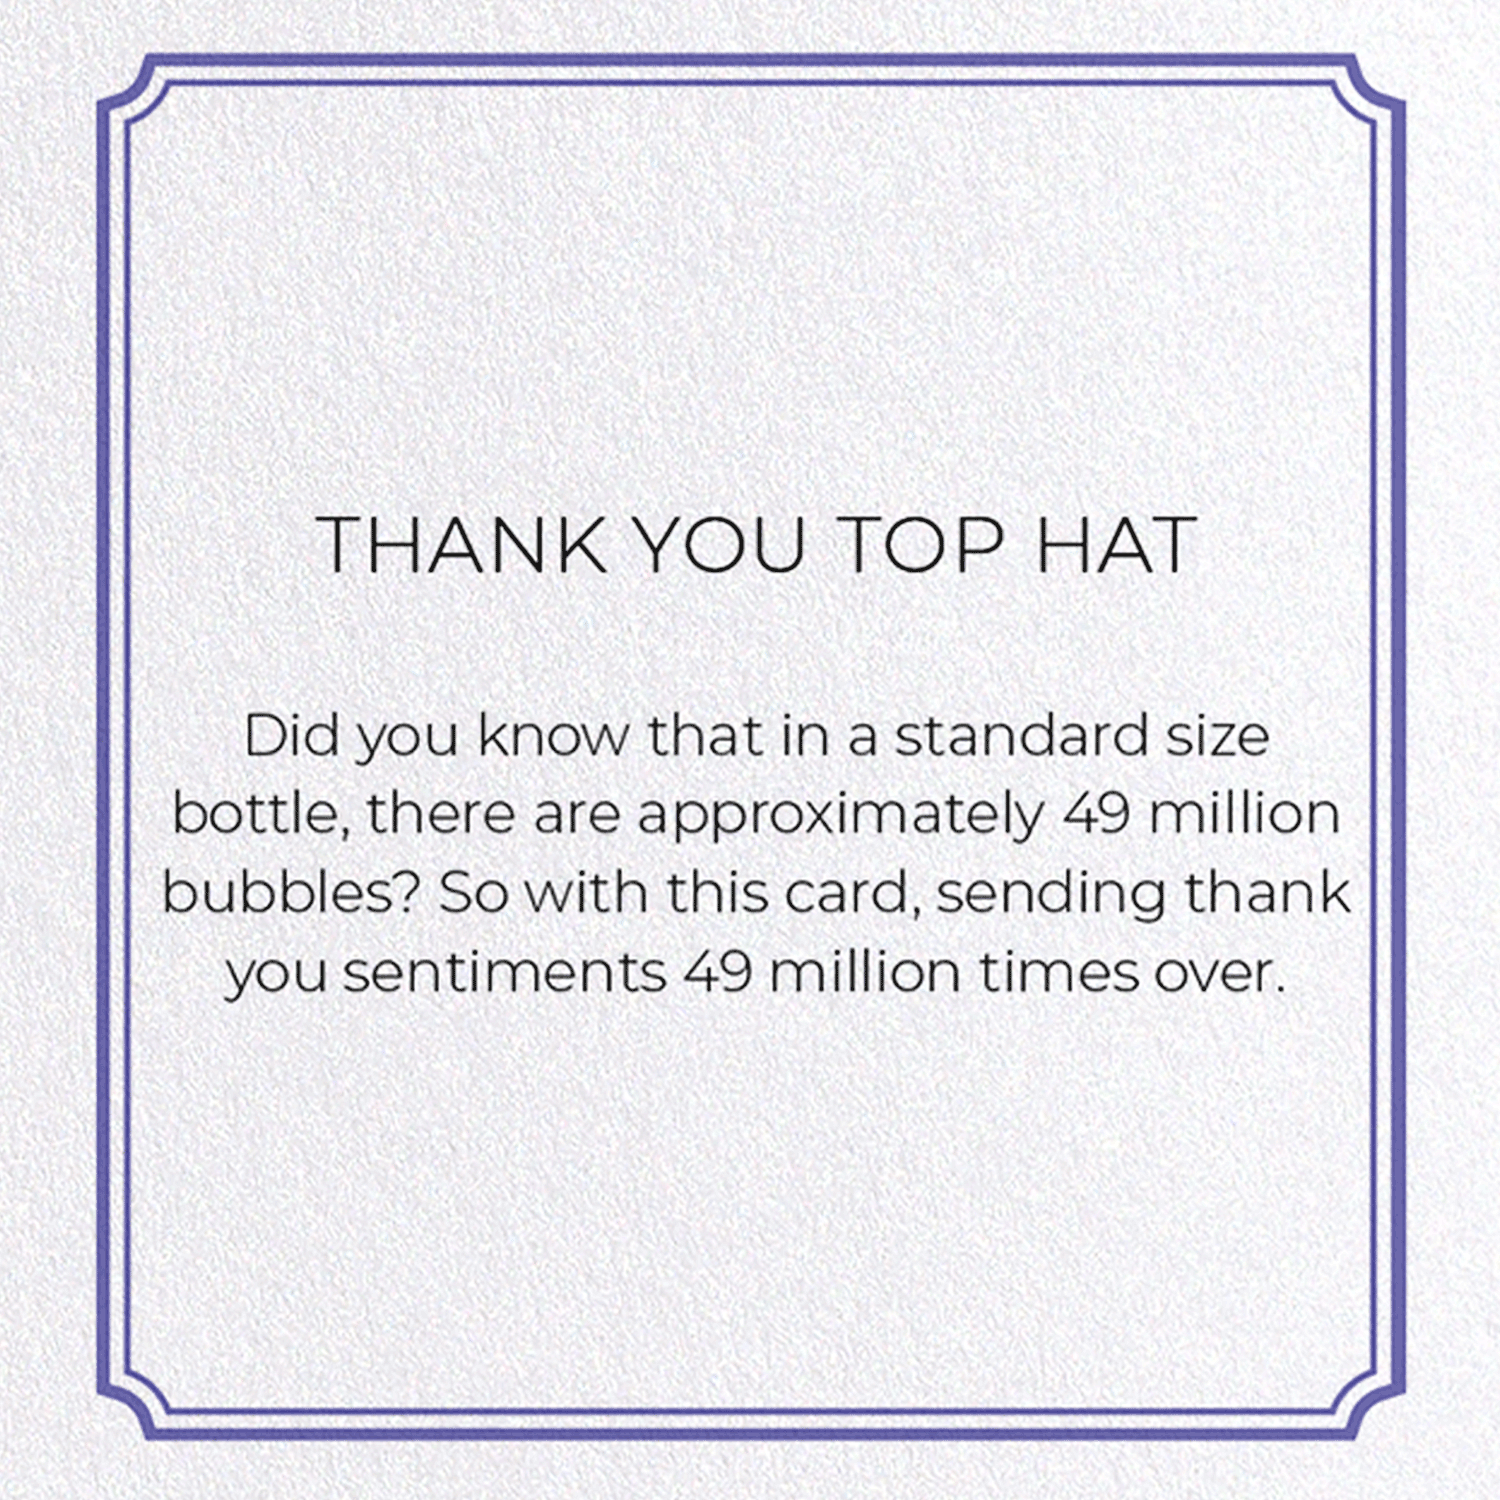 THANK YOU TOP HAT